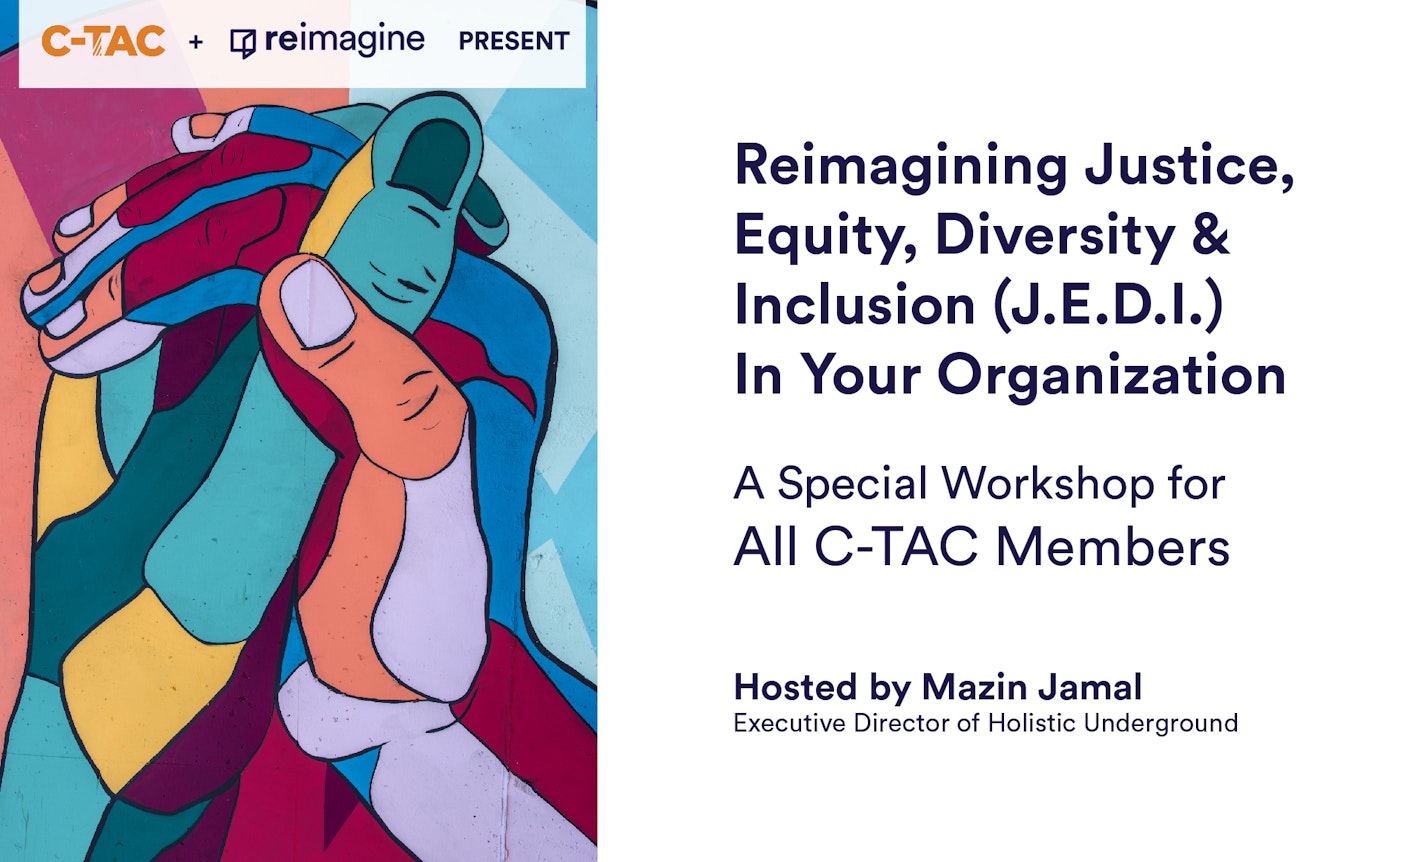 Reimagining Justice, Equity, Diversity & Inclusion